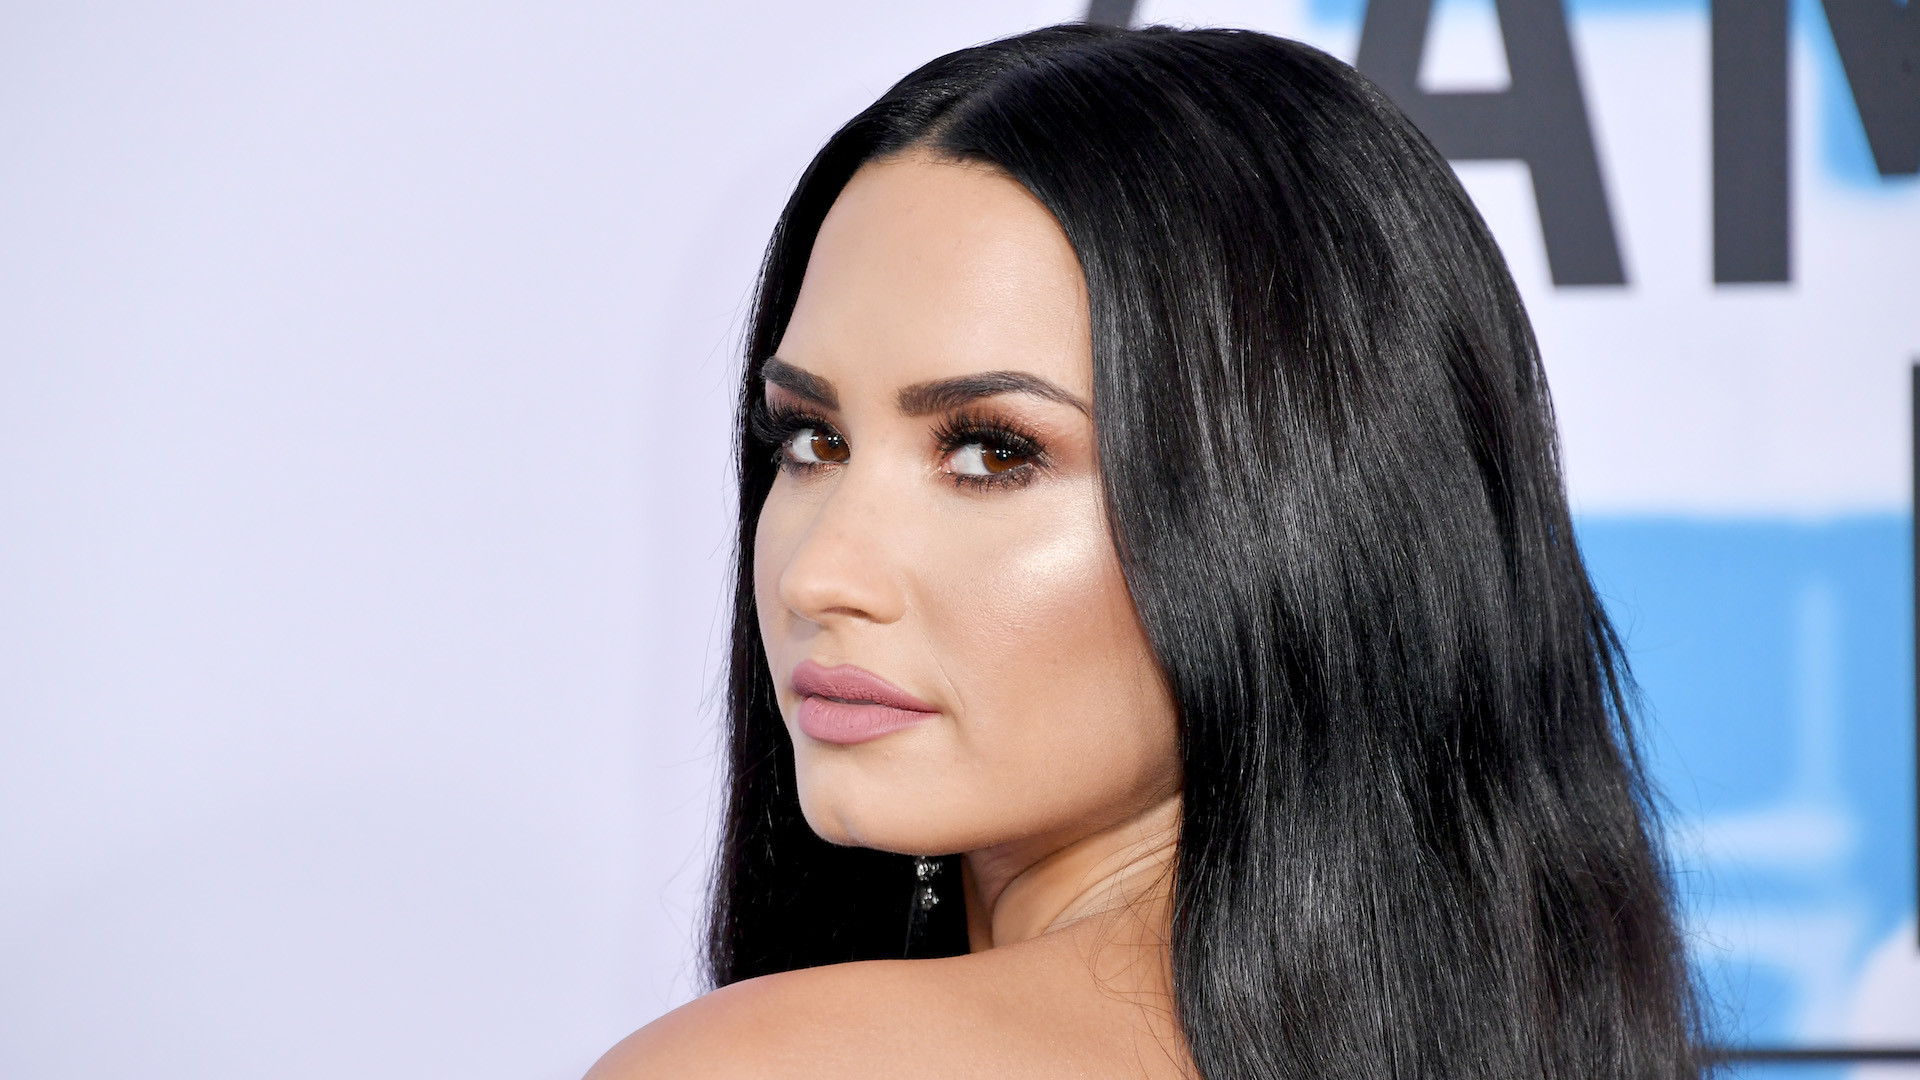 1920x1080 Demi Lovato looking over shoulder. Image: Neilson Barnard/Getty Images.